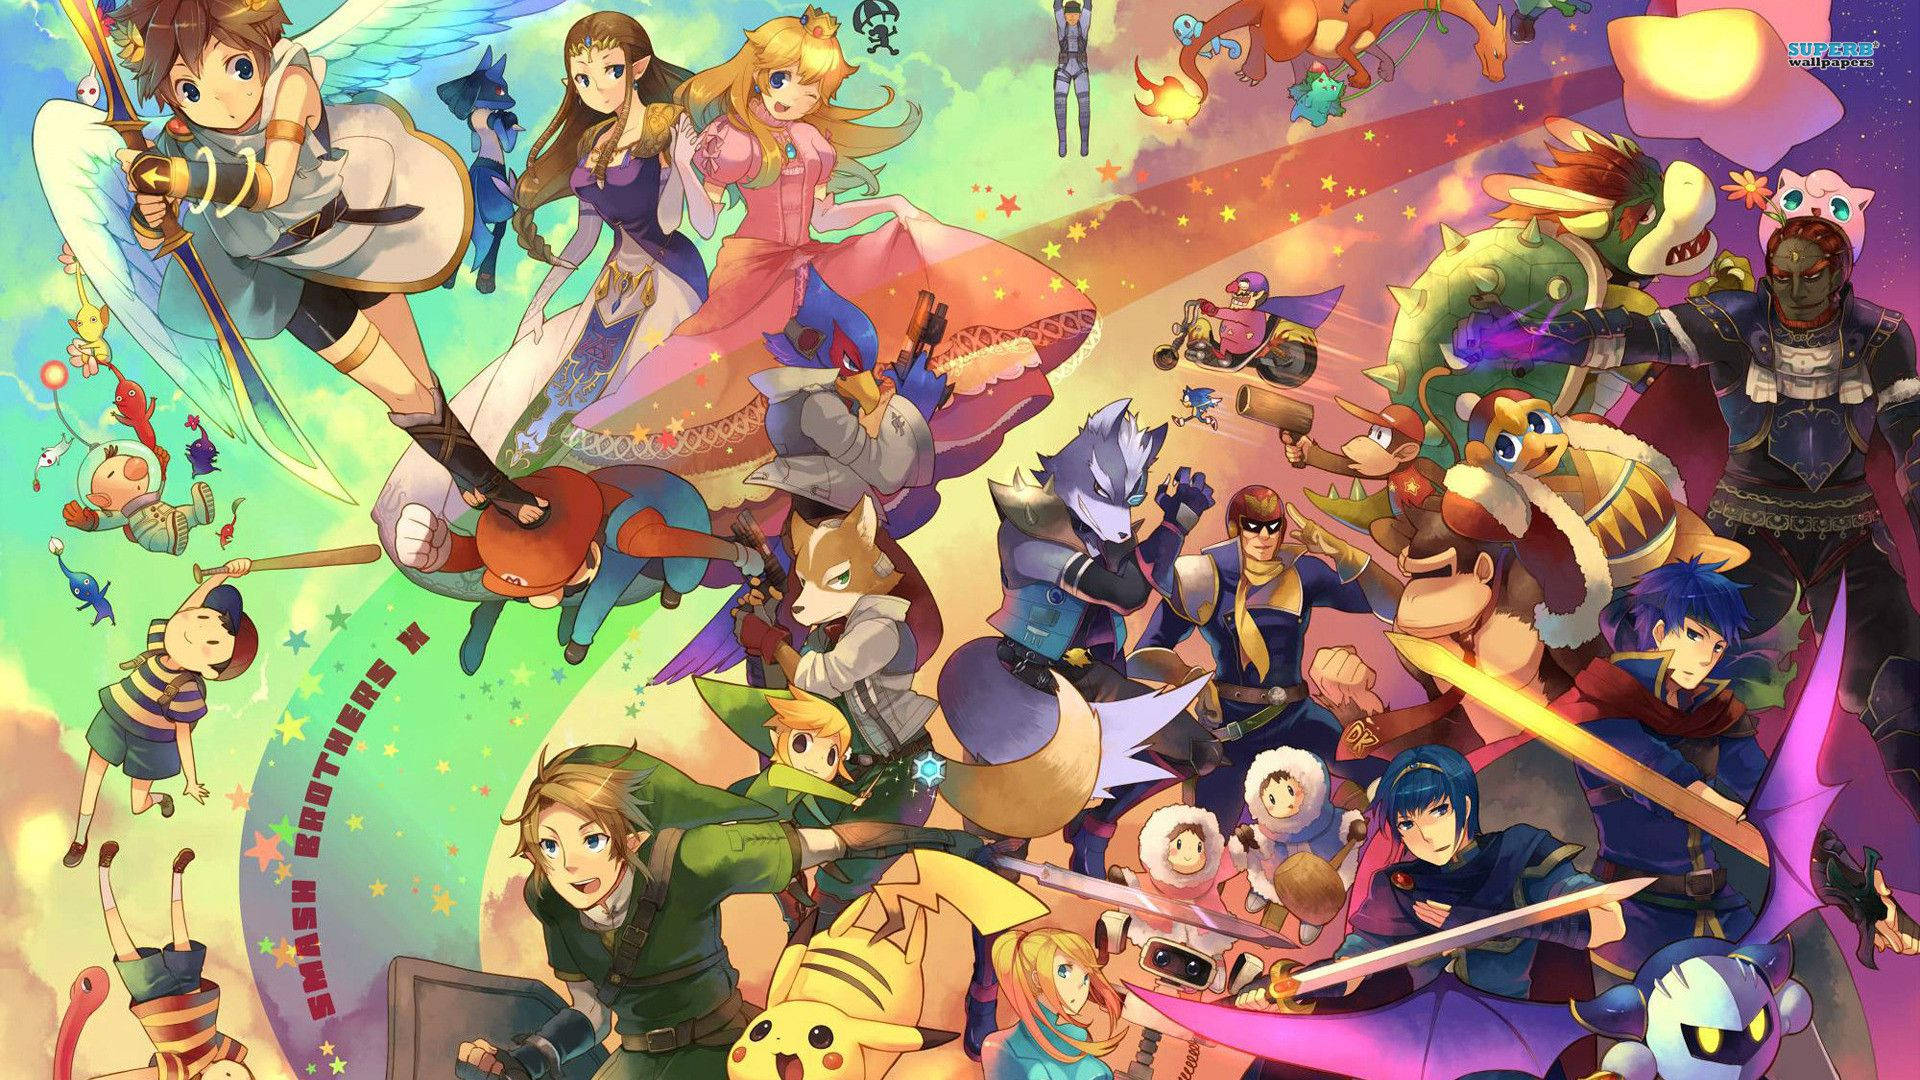 Super Smash Bros Ultimate 1920X1080 Wallpaper and Background Image